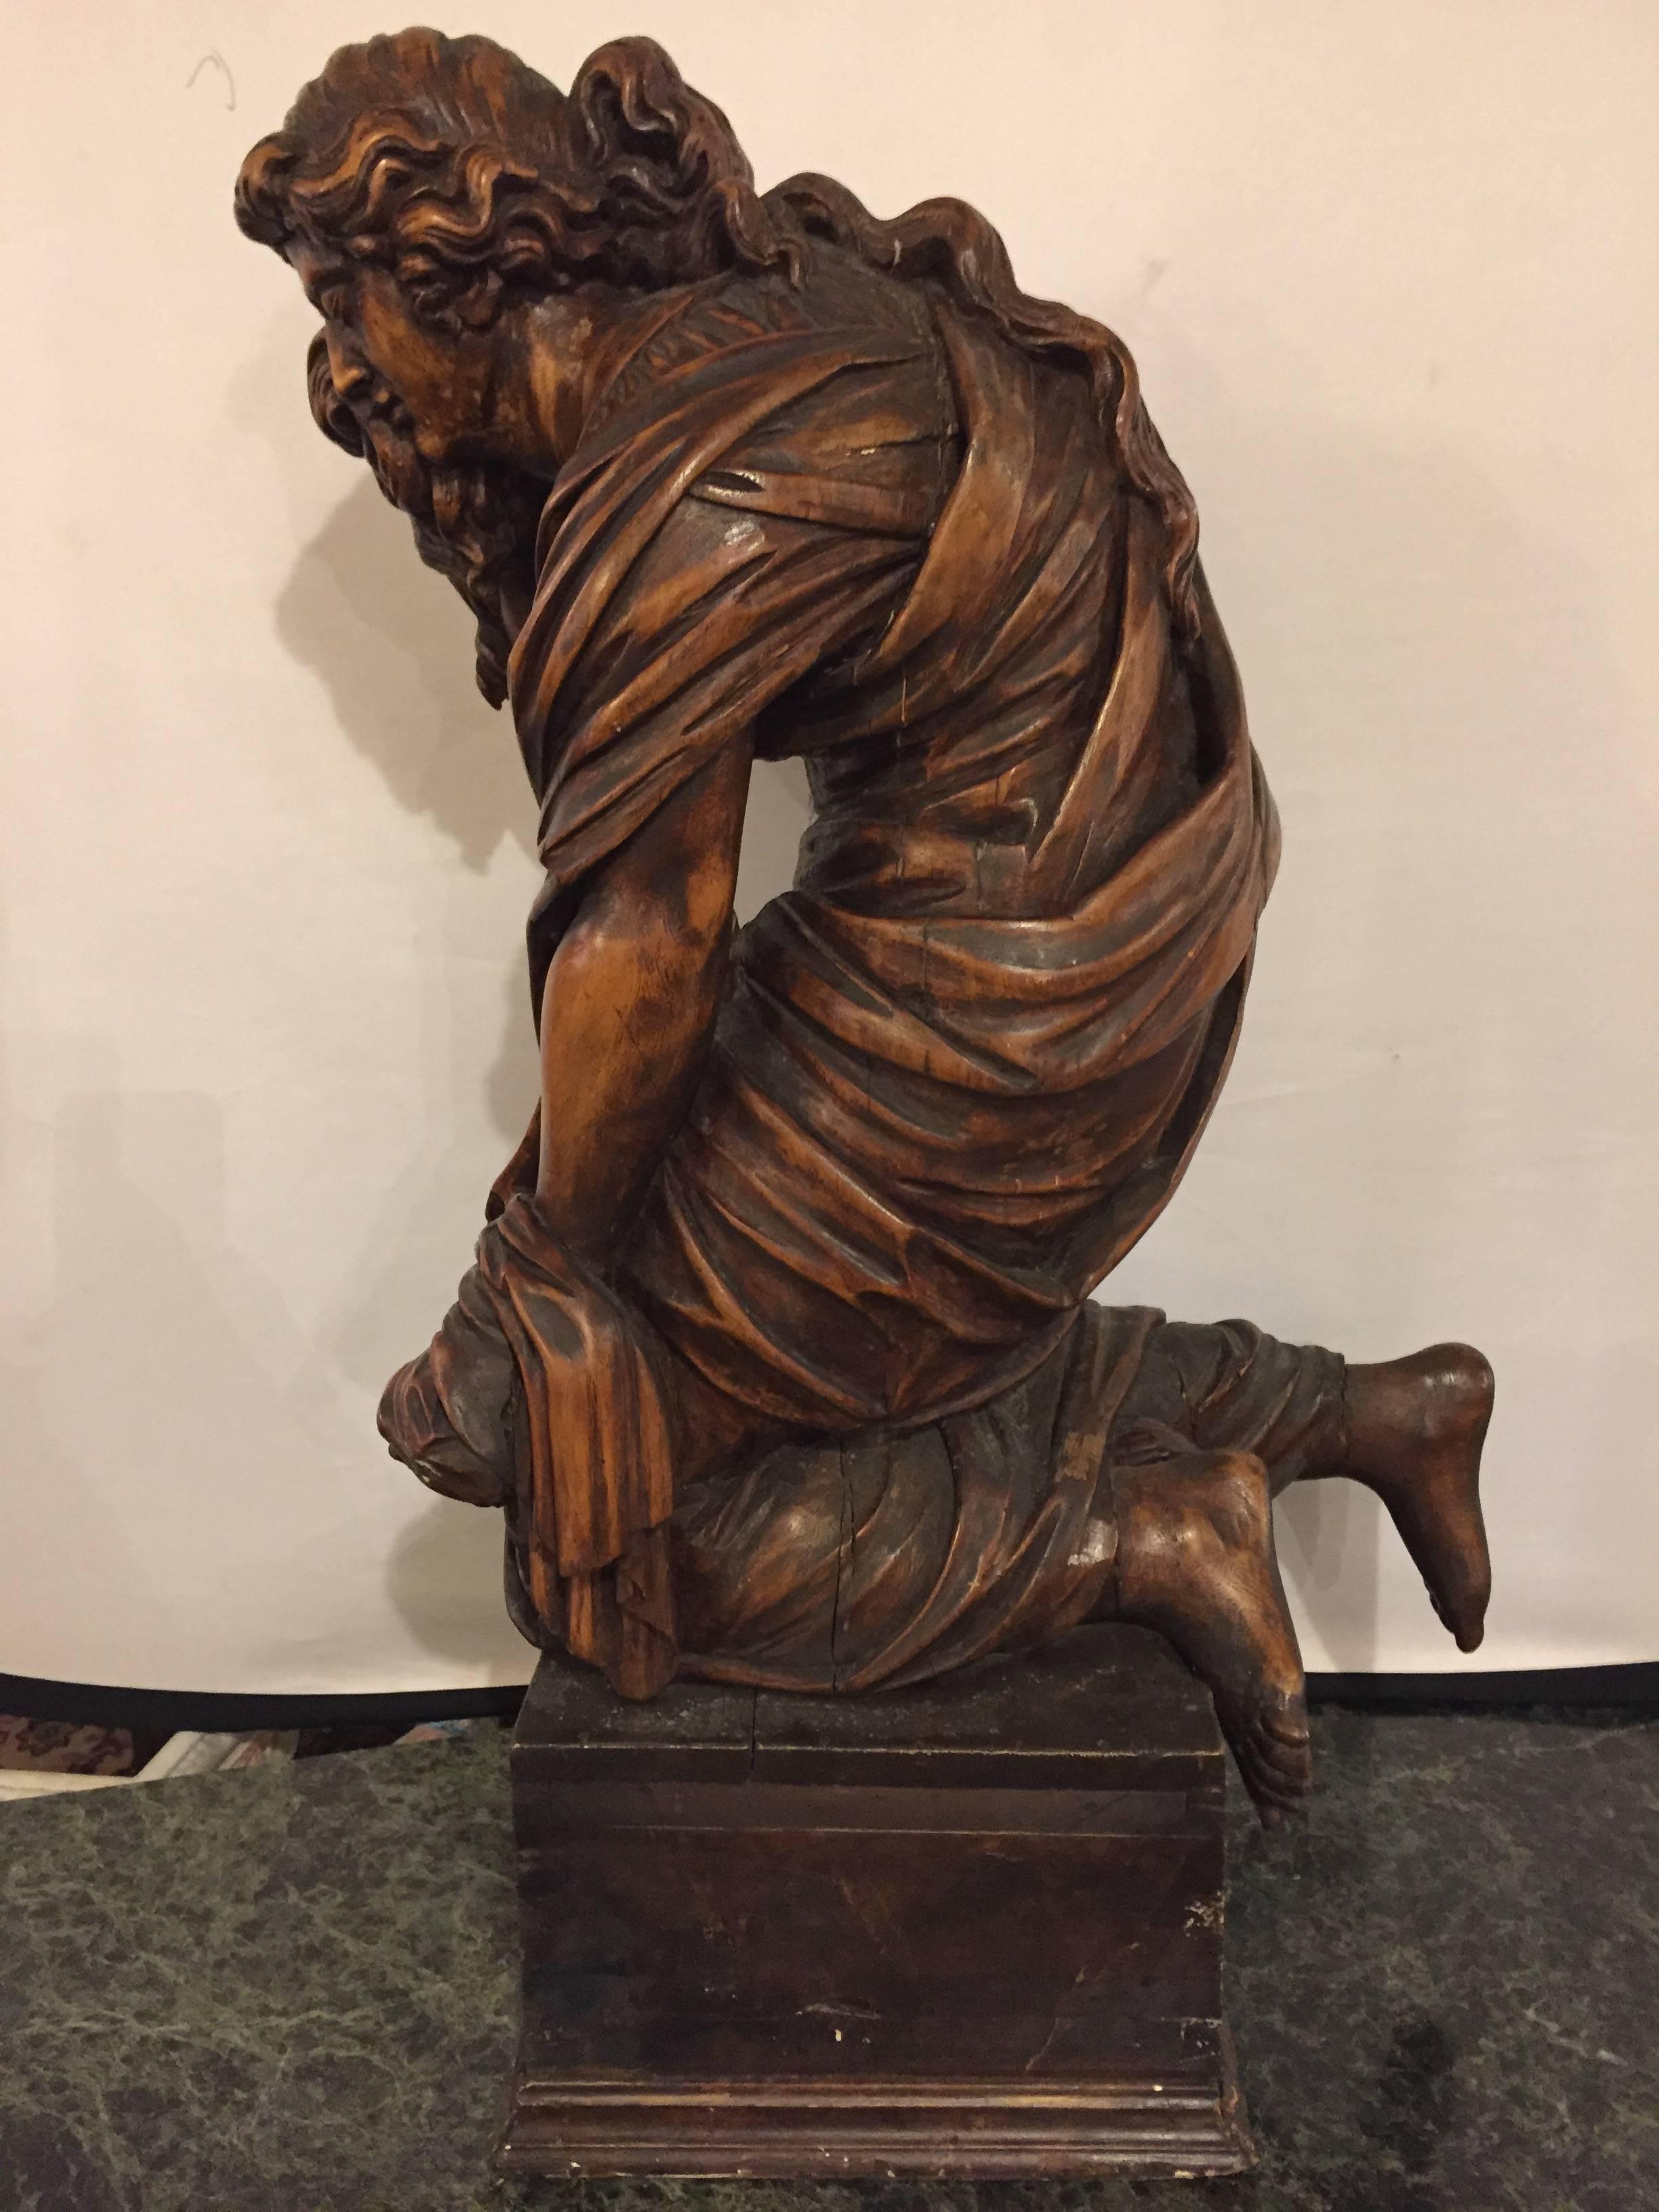 Adirondack Palatial 18th Century Carved Statue of a Kneeling Woman in Tears